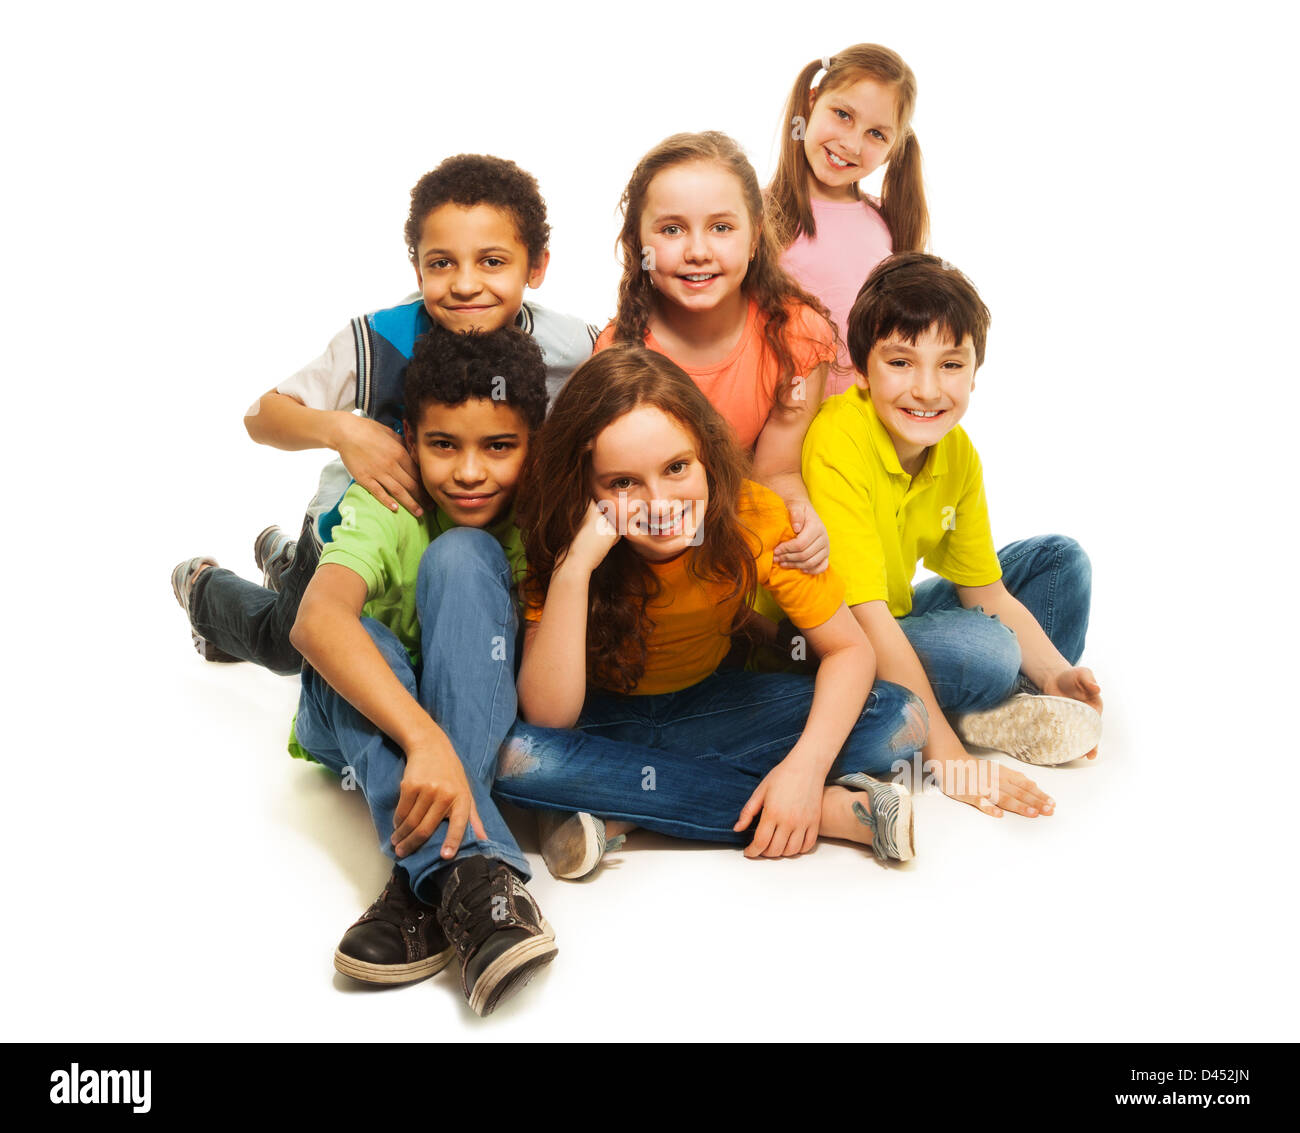 Group of black and Caucasian kids sitting happy together, smiling and laughing Stock Photo